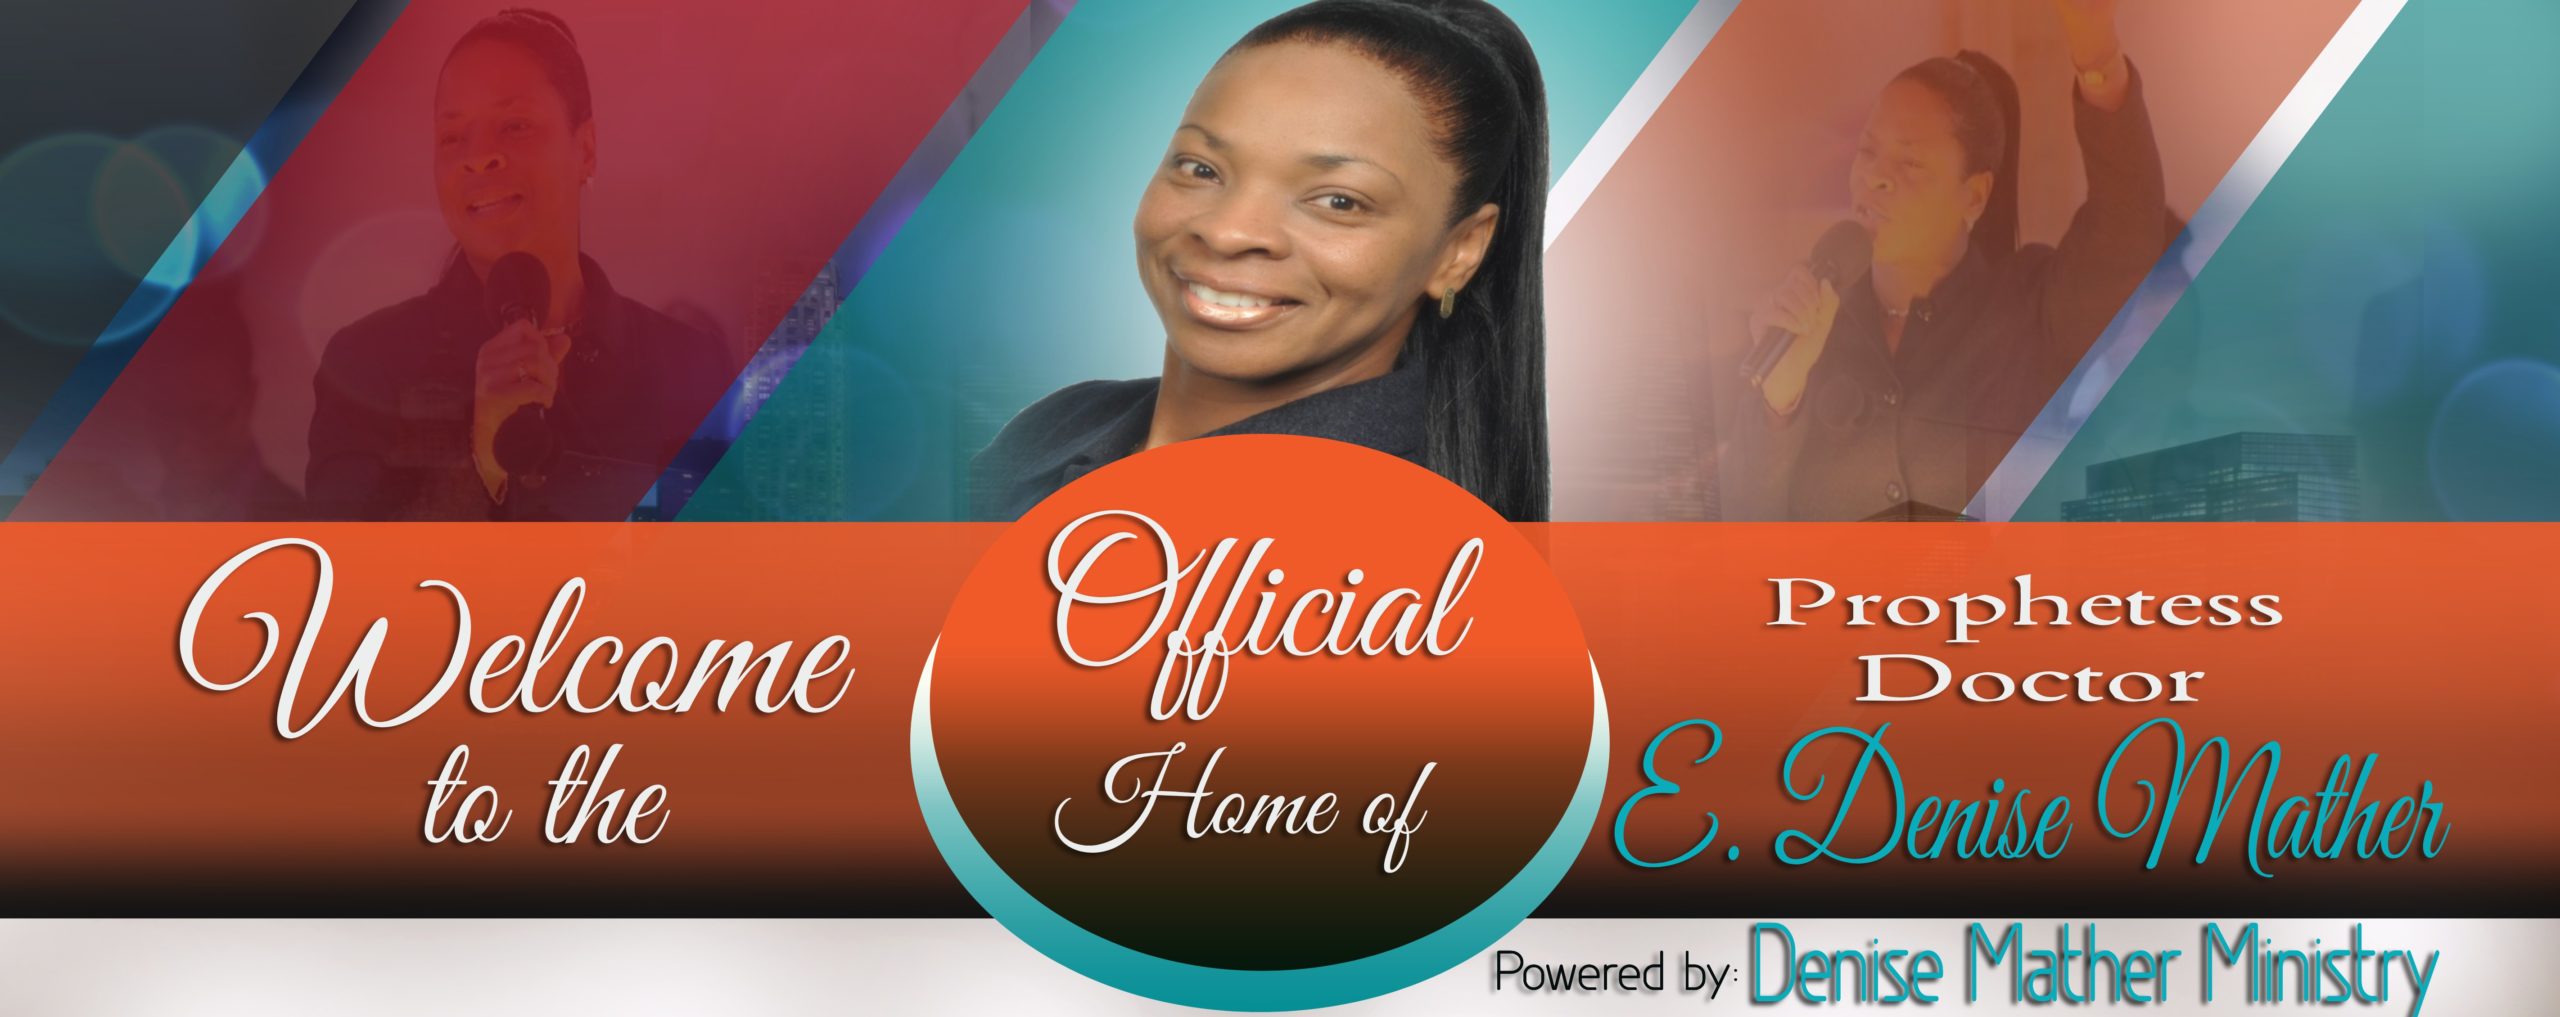 Invading Force Ministry Int’l – Home of Denise Mather Ministry